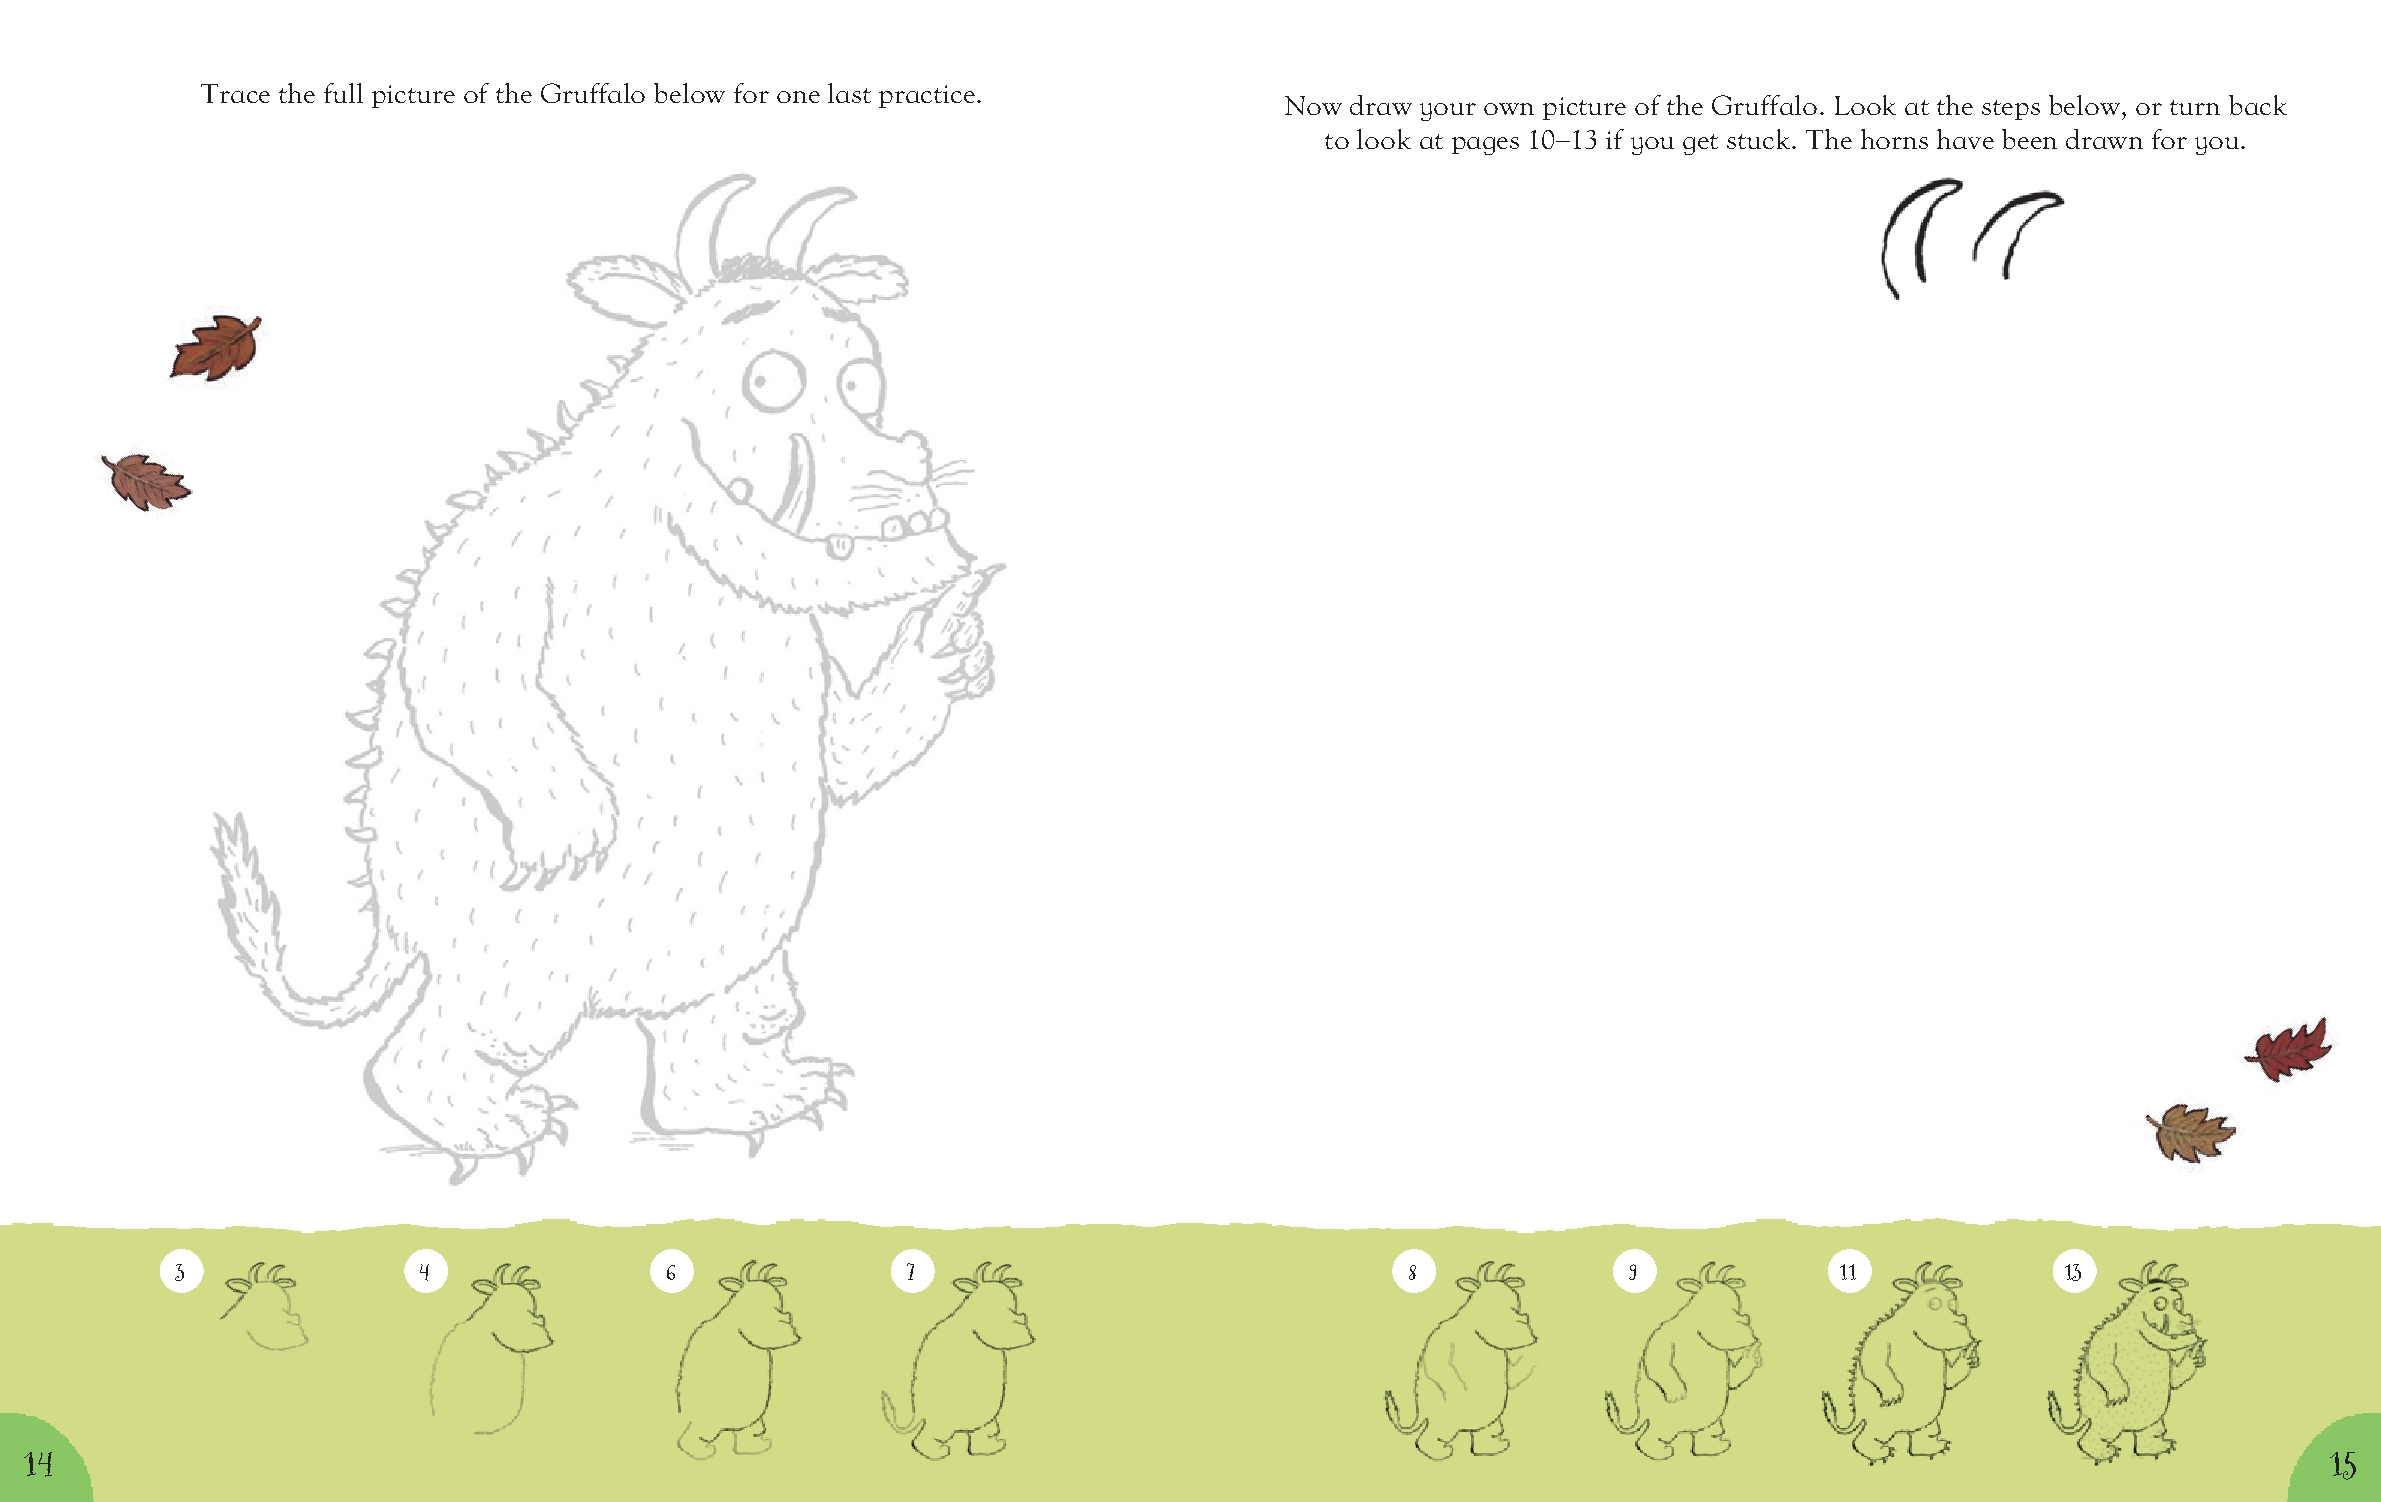 Axel Scheffler's How to Draw the Gruffalo and Friends